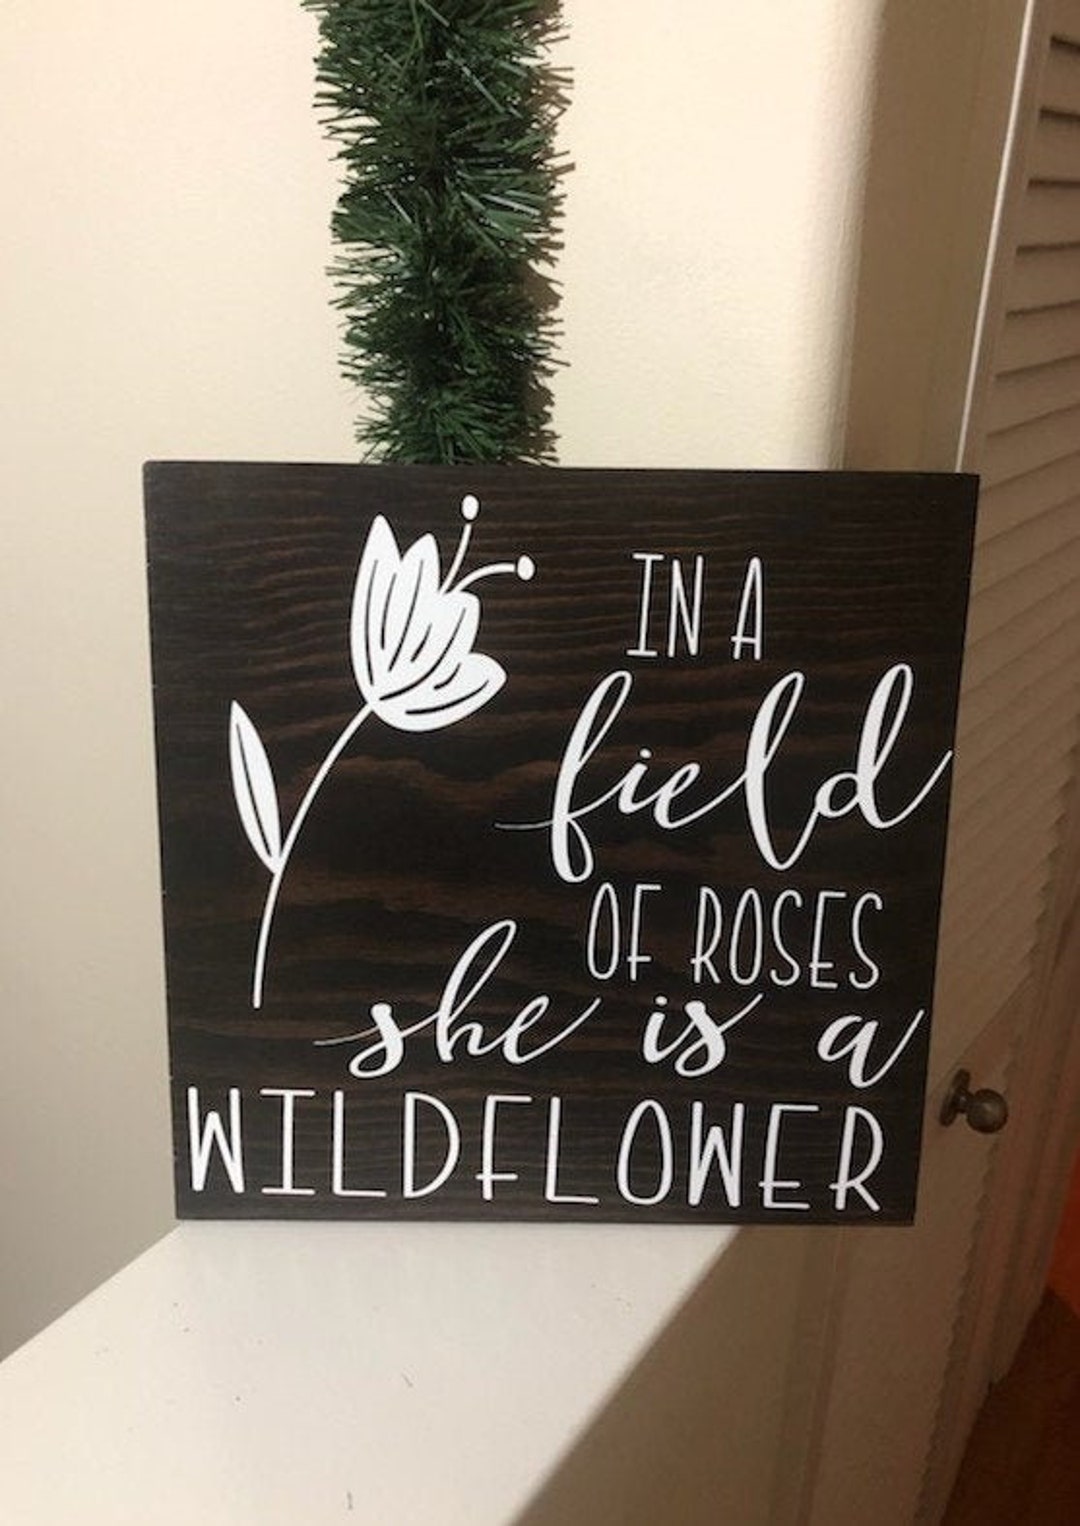 In a field of roses she is a wildflower sign – Lovin' Wood Signs